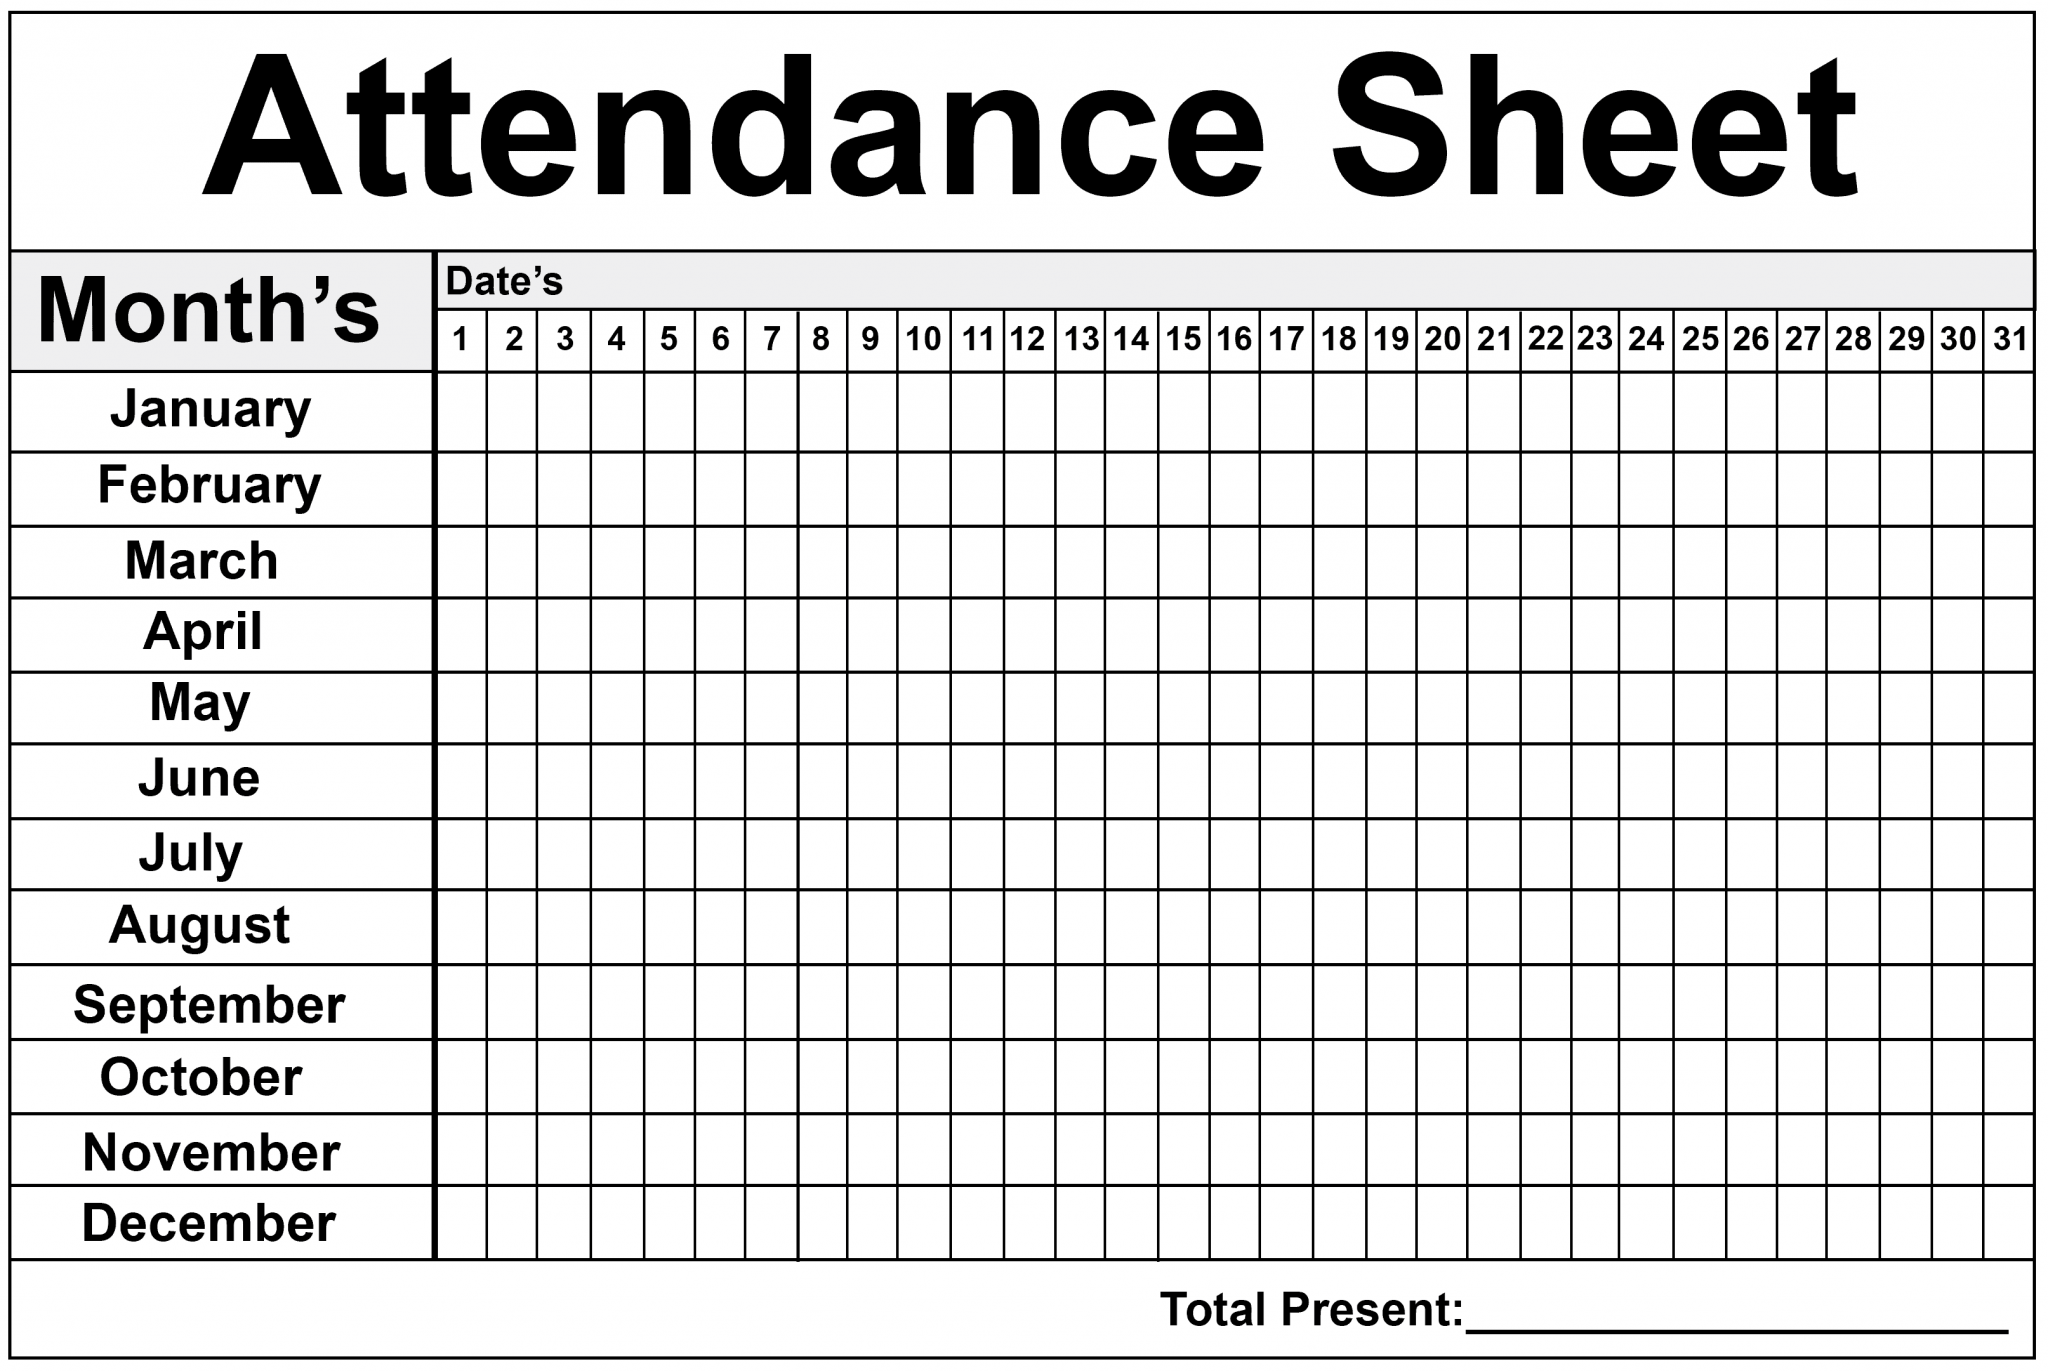 Daily/Monthly Employee Attendance Sheet Template Free HowToWiki